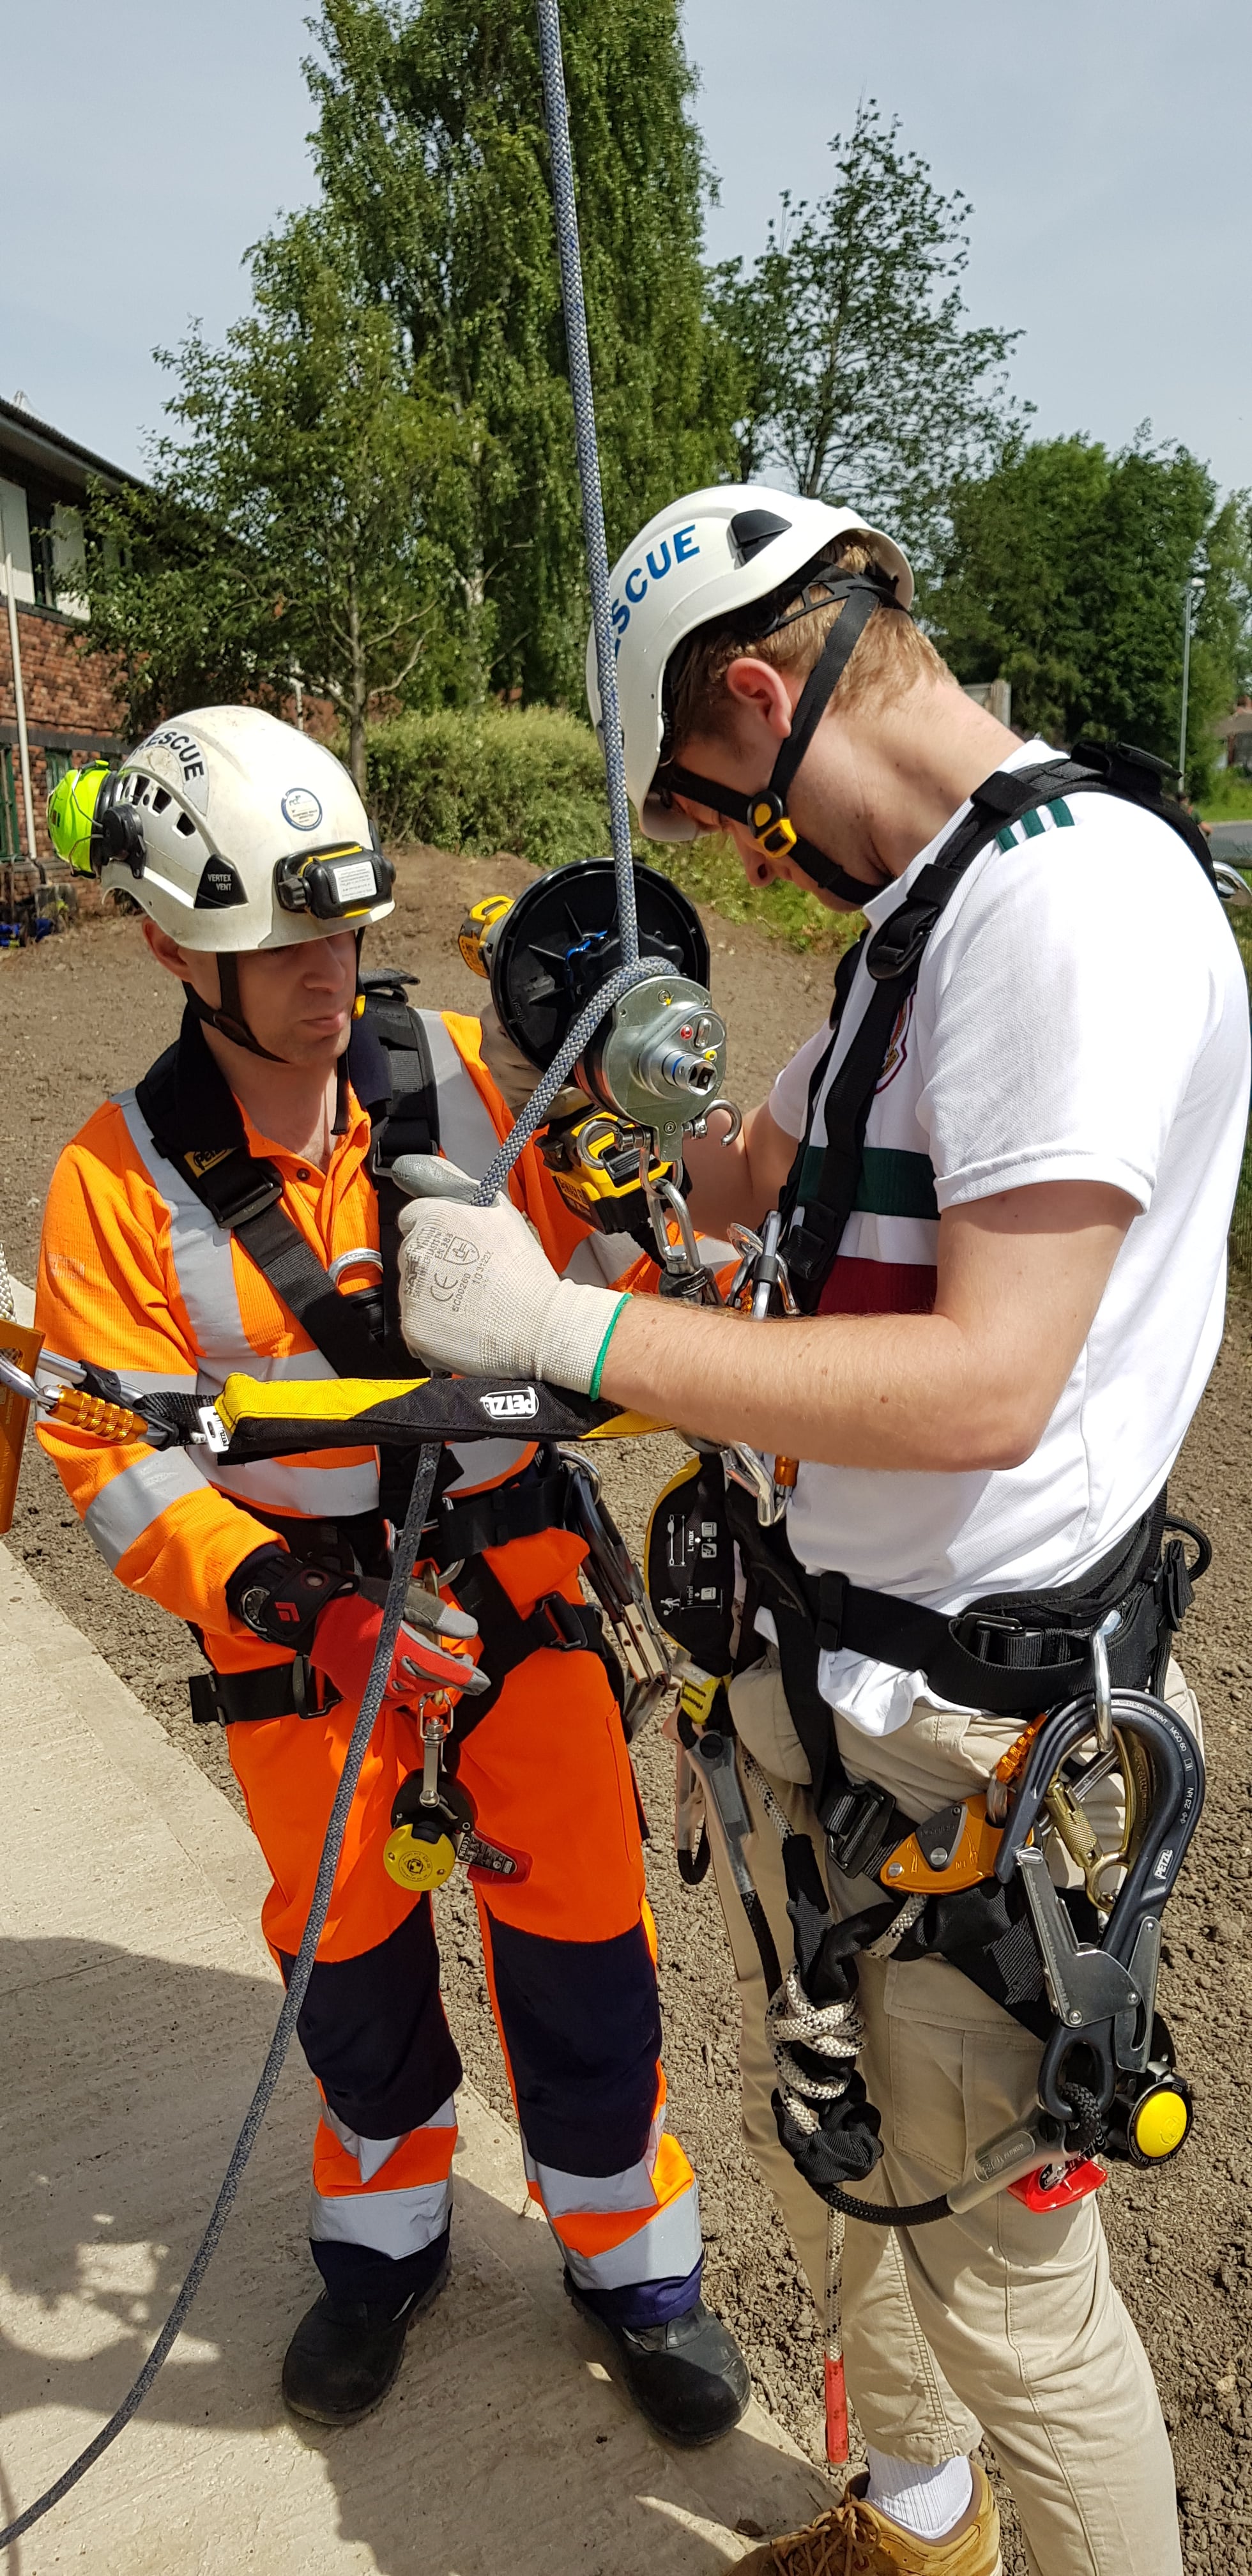 Equipment being worn and checked on a practical work at height training course. 